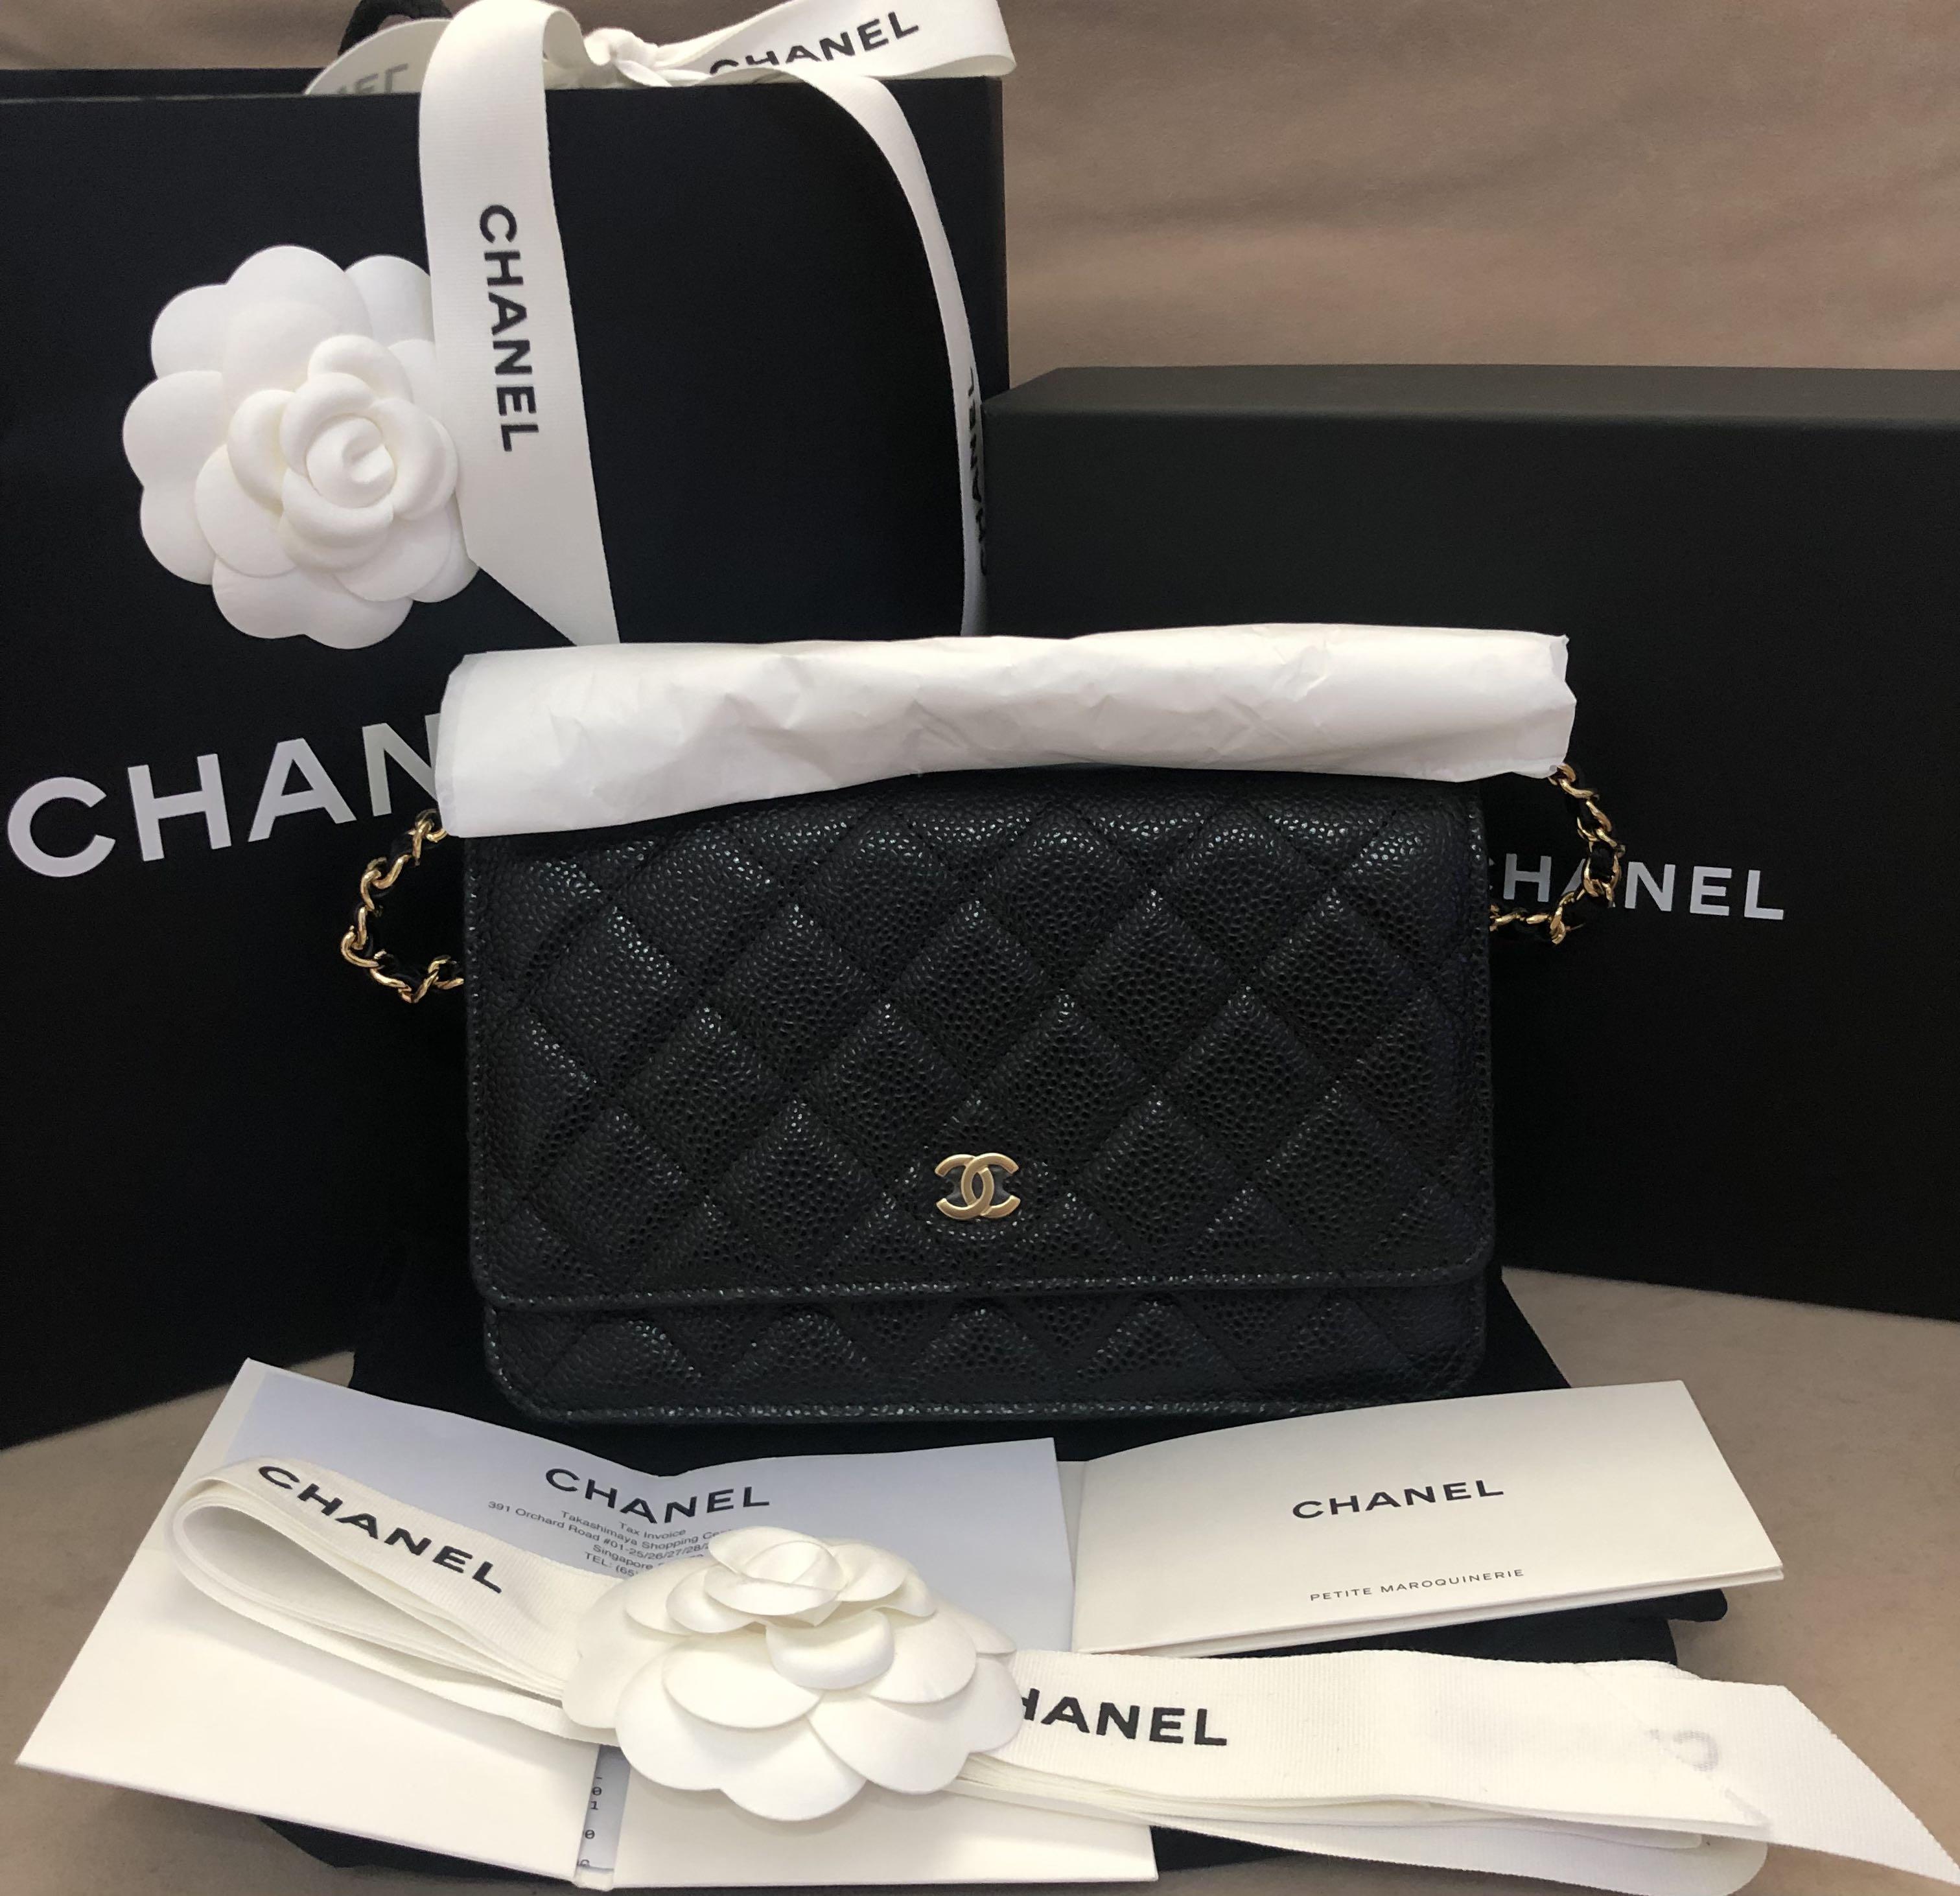 AUTHENTIC CHANEL Caviar WOC Wallet on Chain Gold Hardware 💙 FULL BOX SET